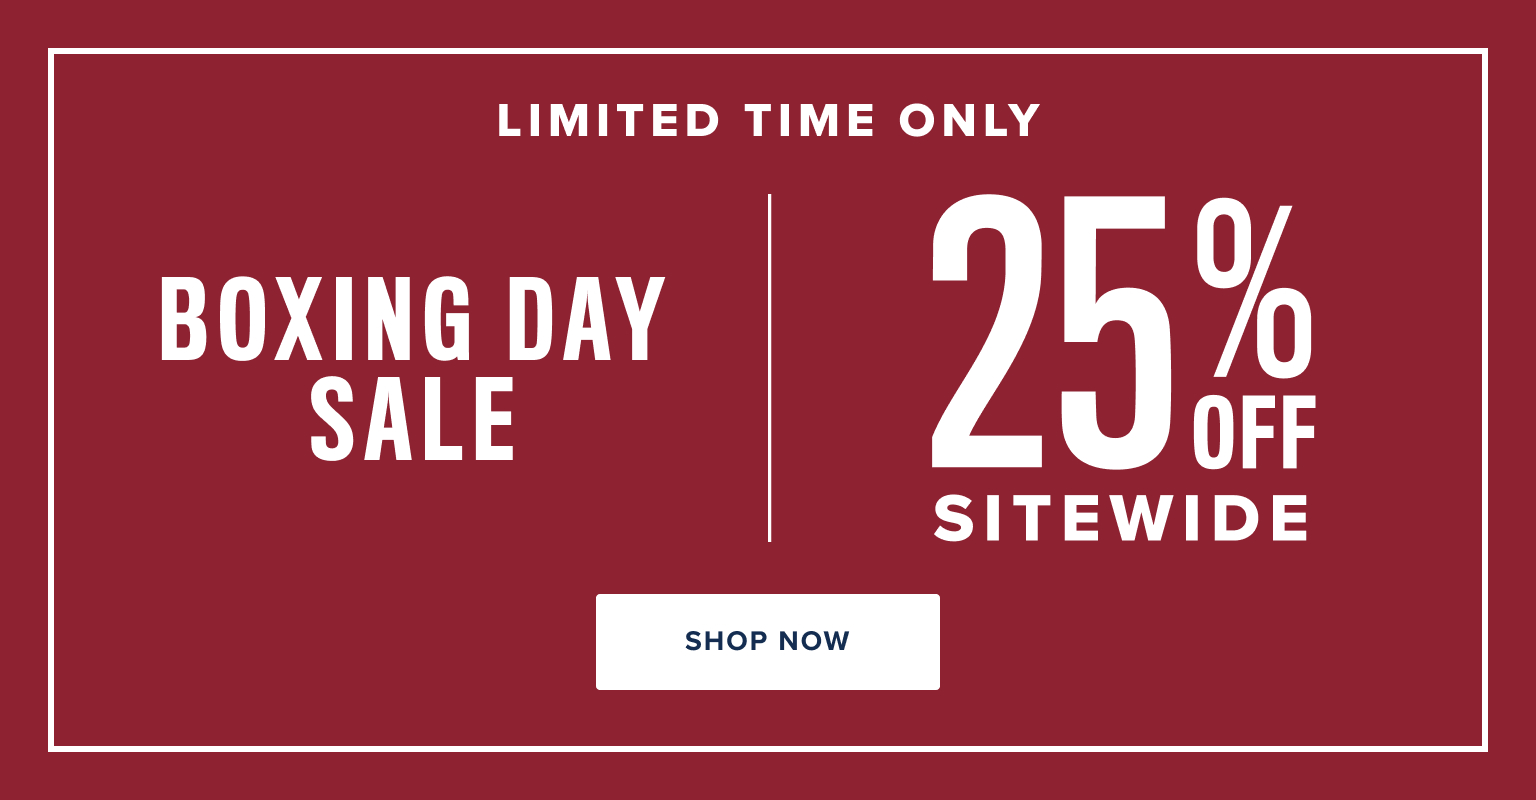 Limited time only. Boxing day sale 25% off sitewide.